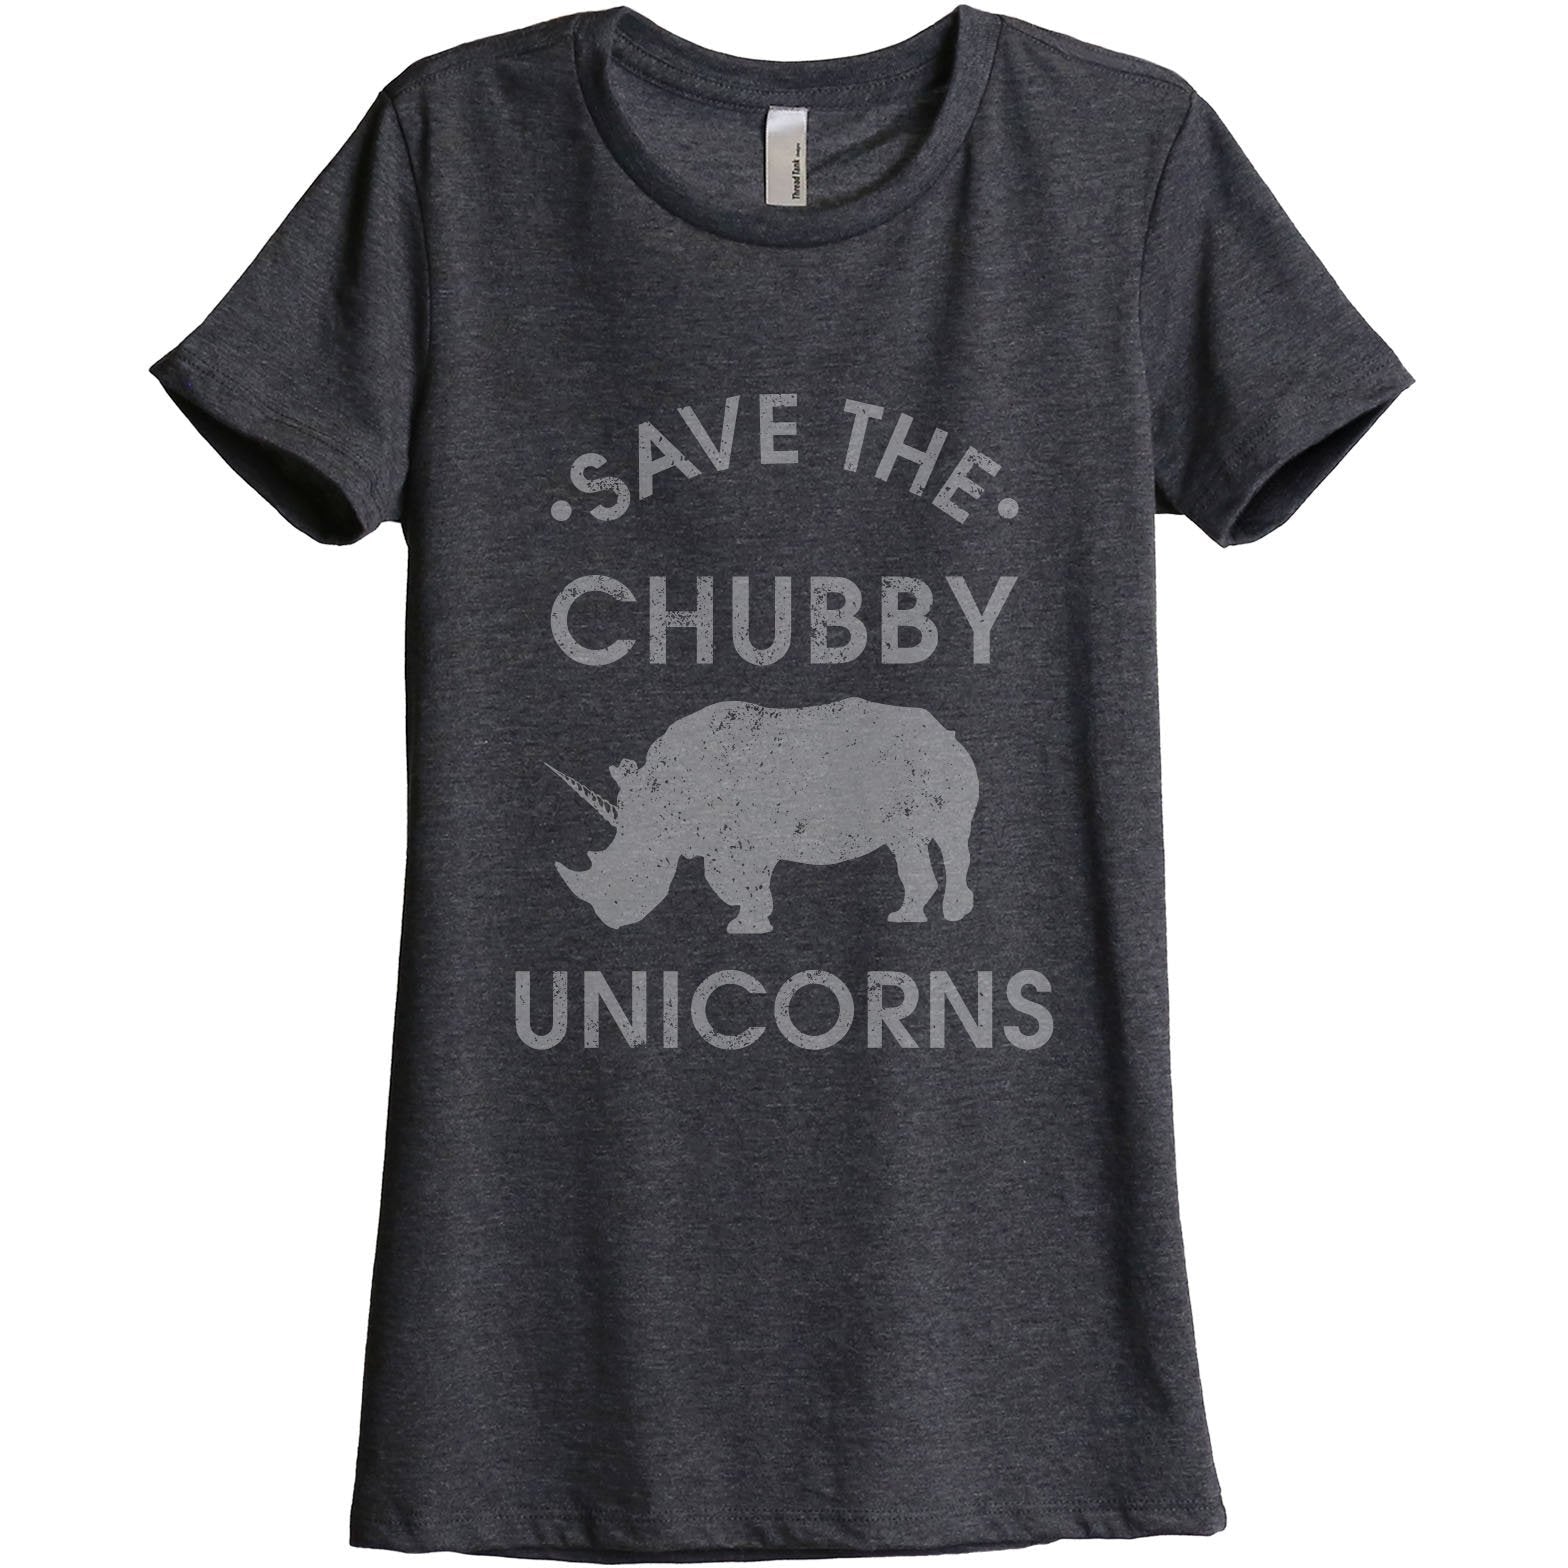 Save The Chubby Unicorns - Stories You Can Wear